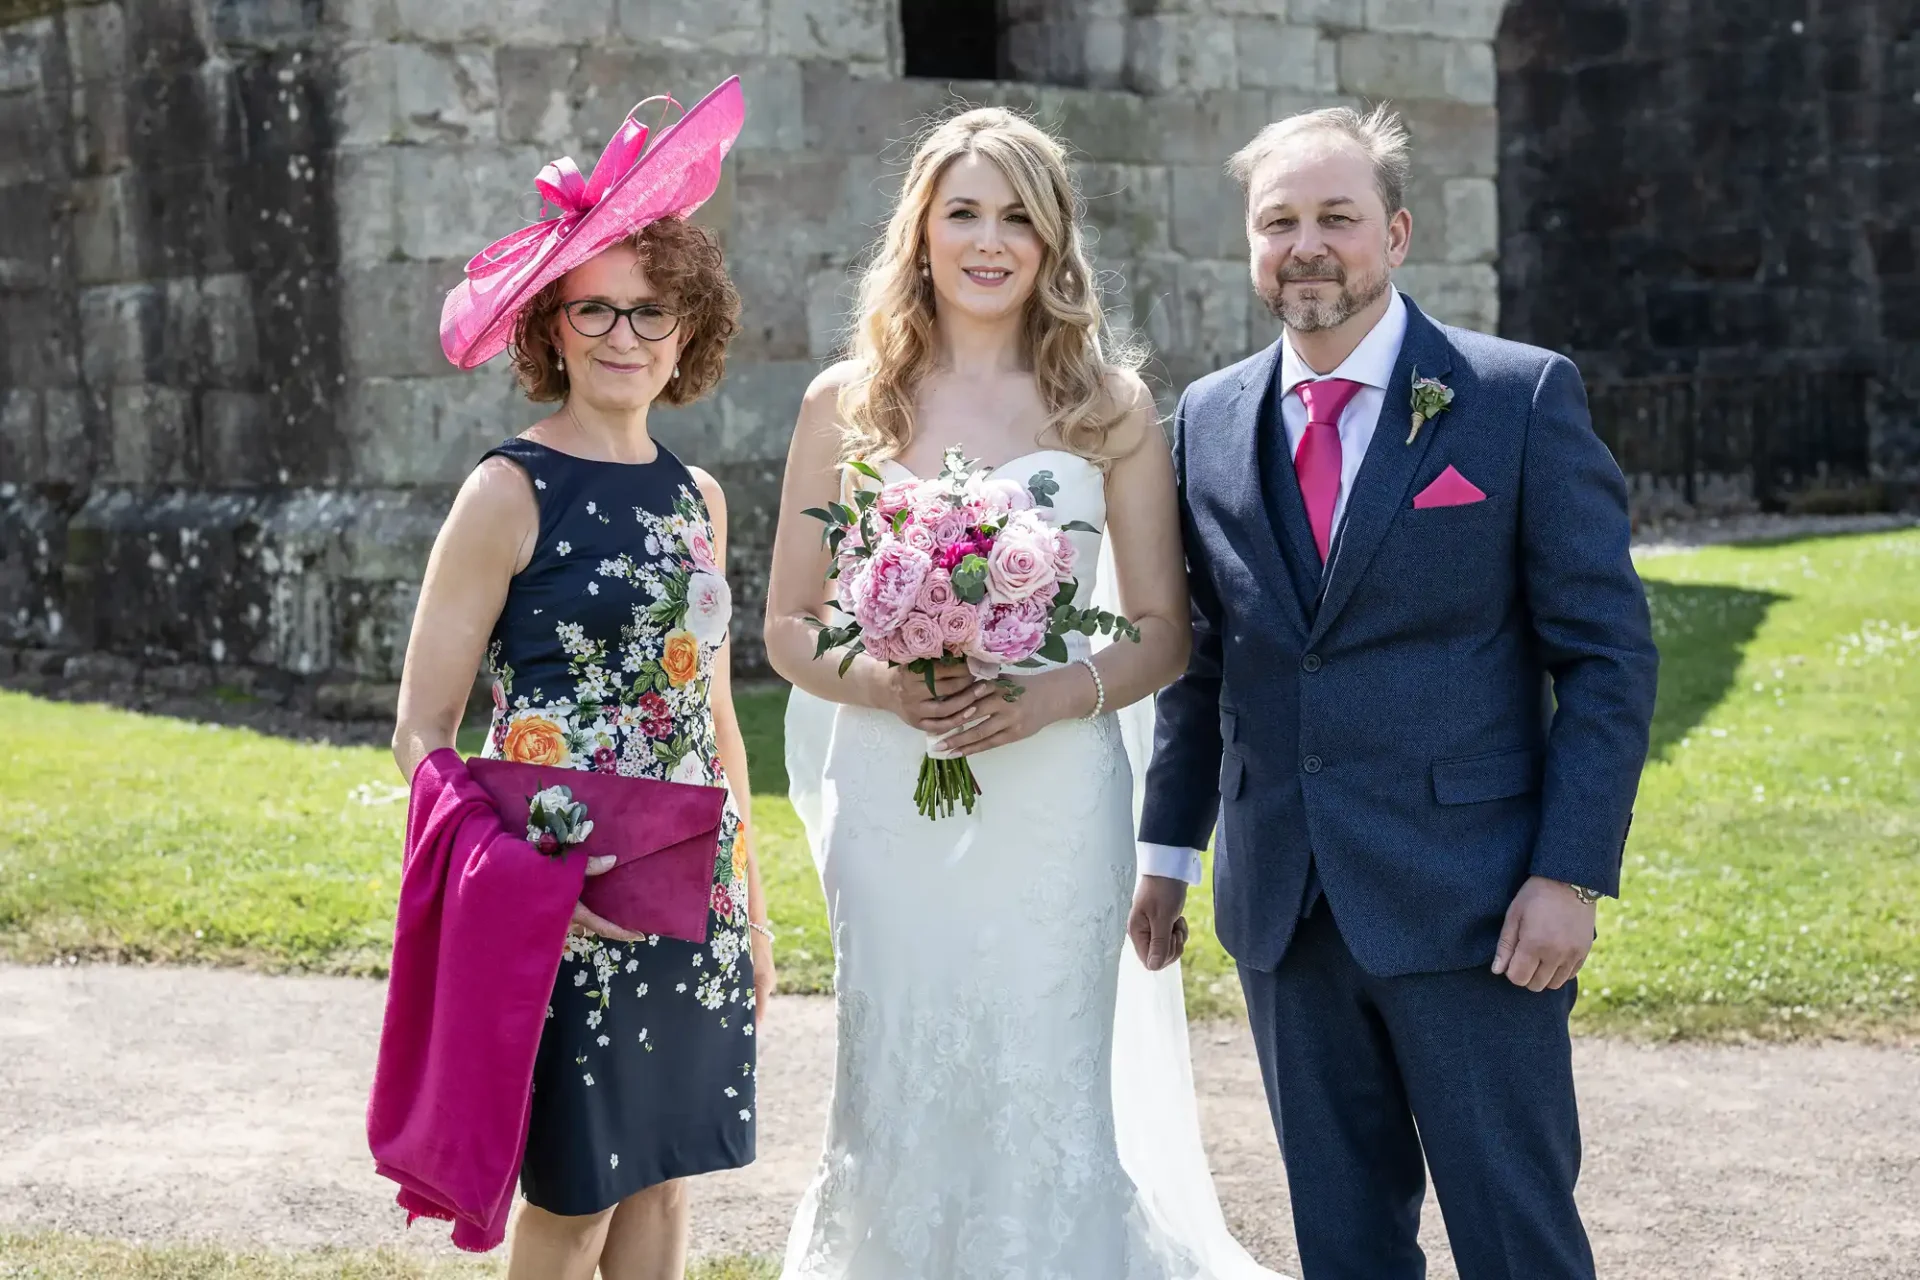 A bride and groom posing with an older woman in a pink hat at a sunny outdoor wedding ceremony.